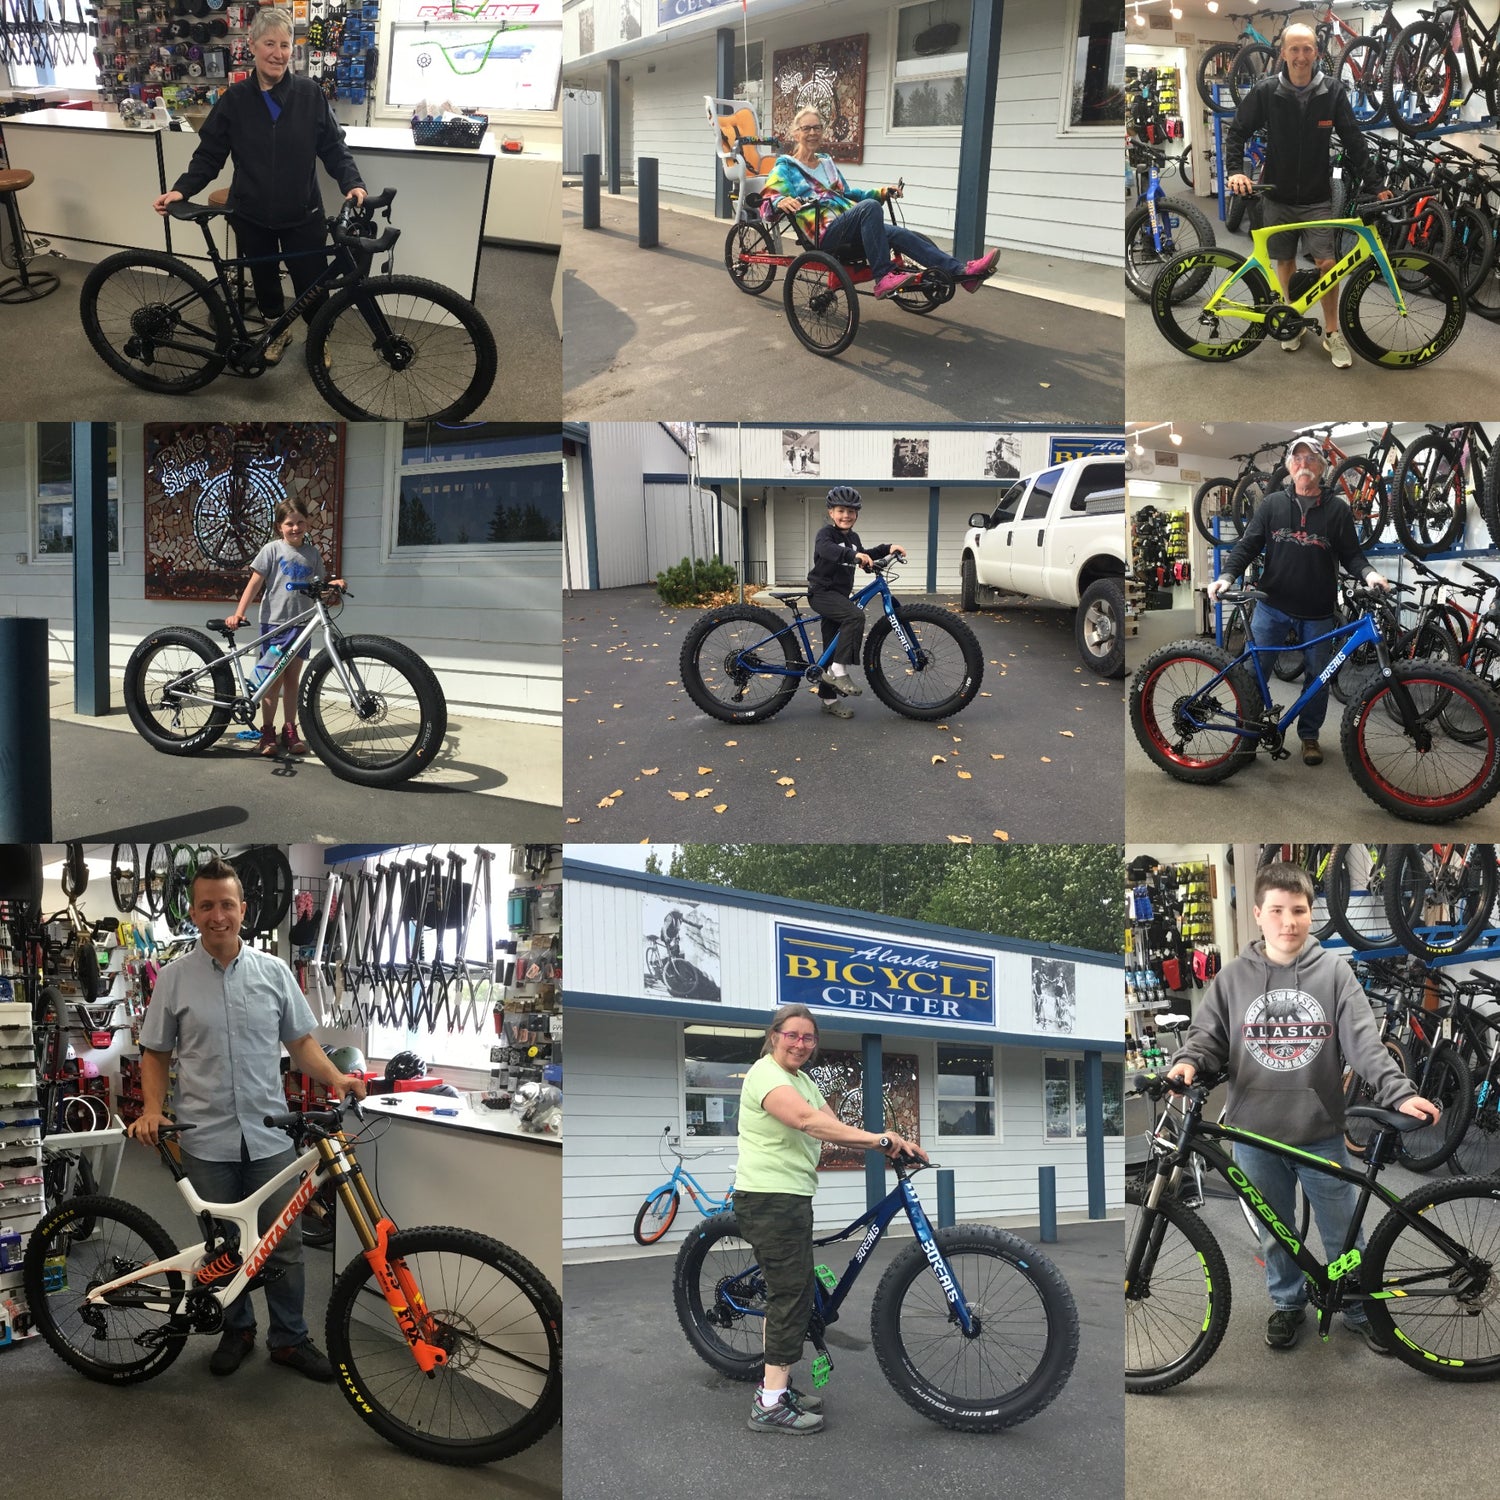 This Picture has a bunch of Alaska Bicycle Center's Customers Smiling for the Today's Smile.